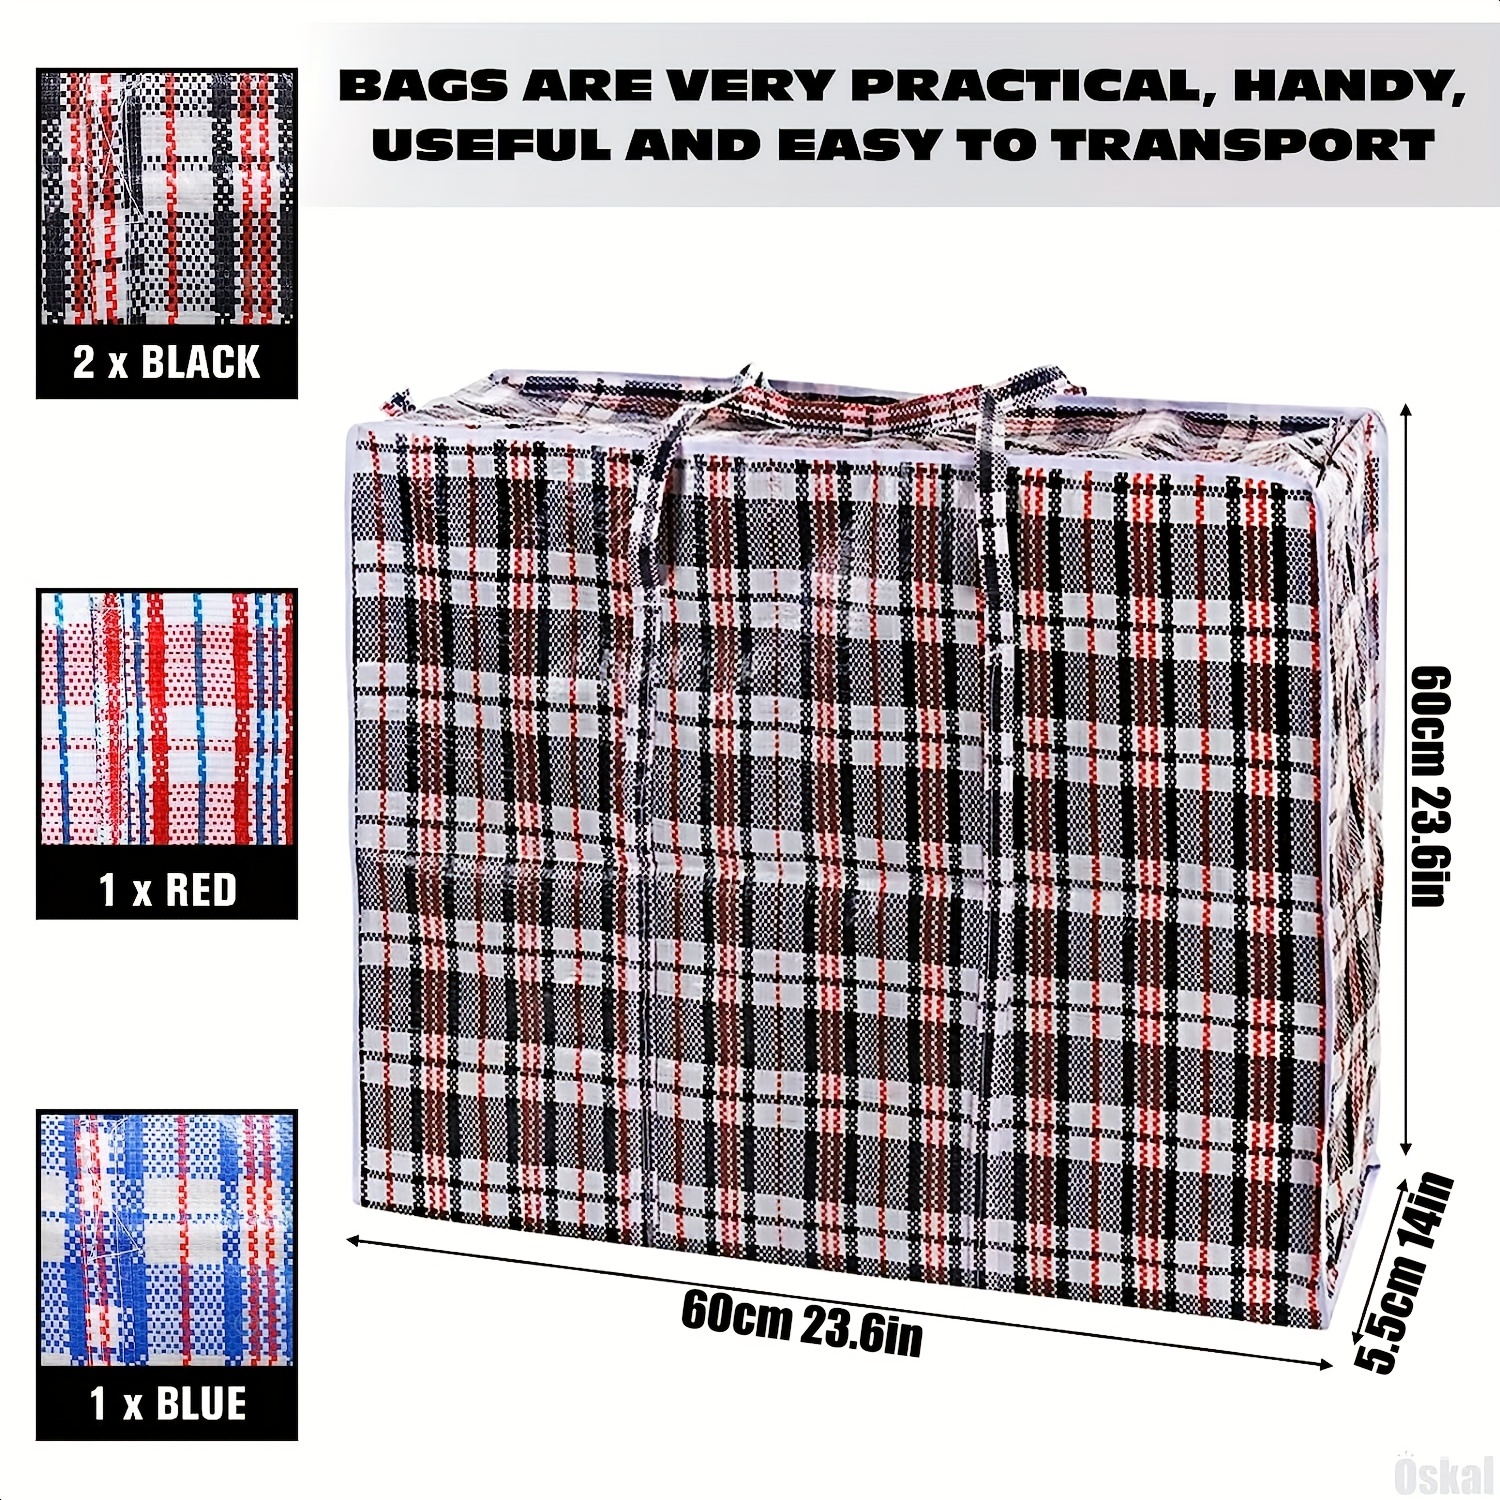 Large Storage Bags with Zipper and Handles for Travel, Laundry